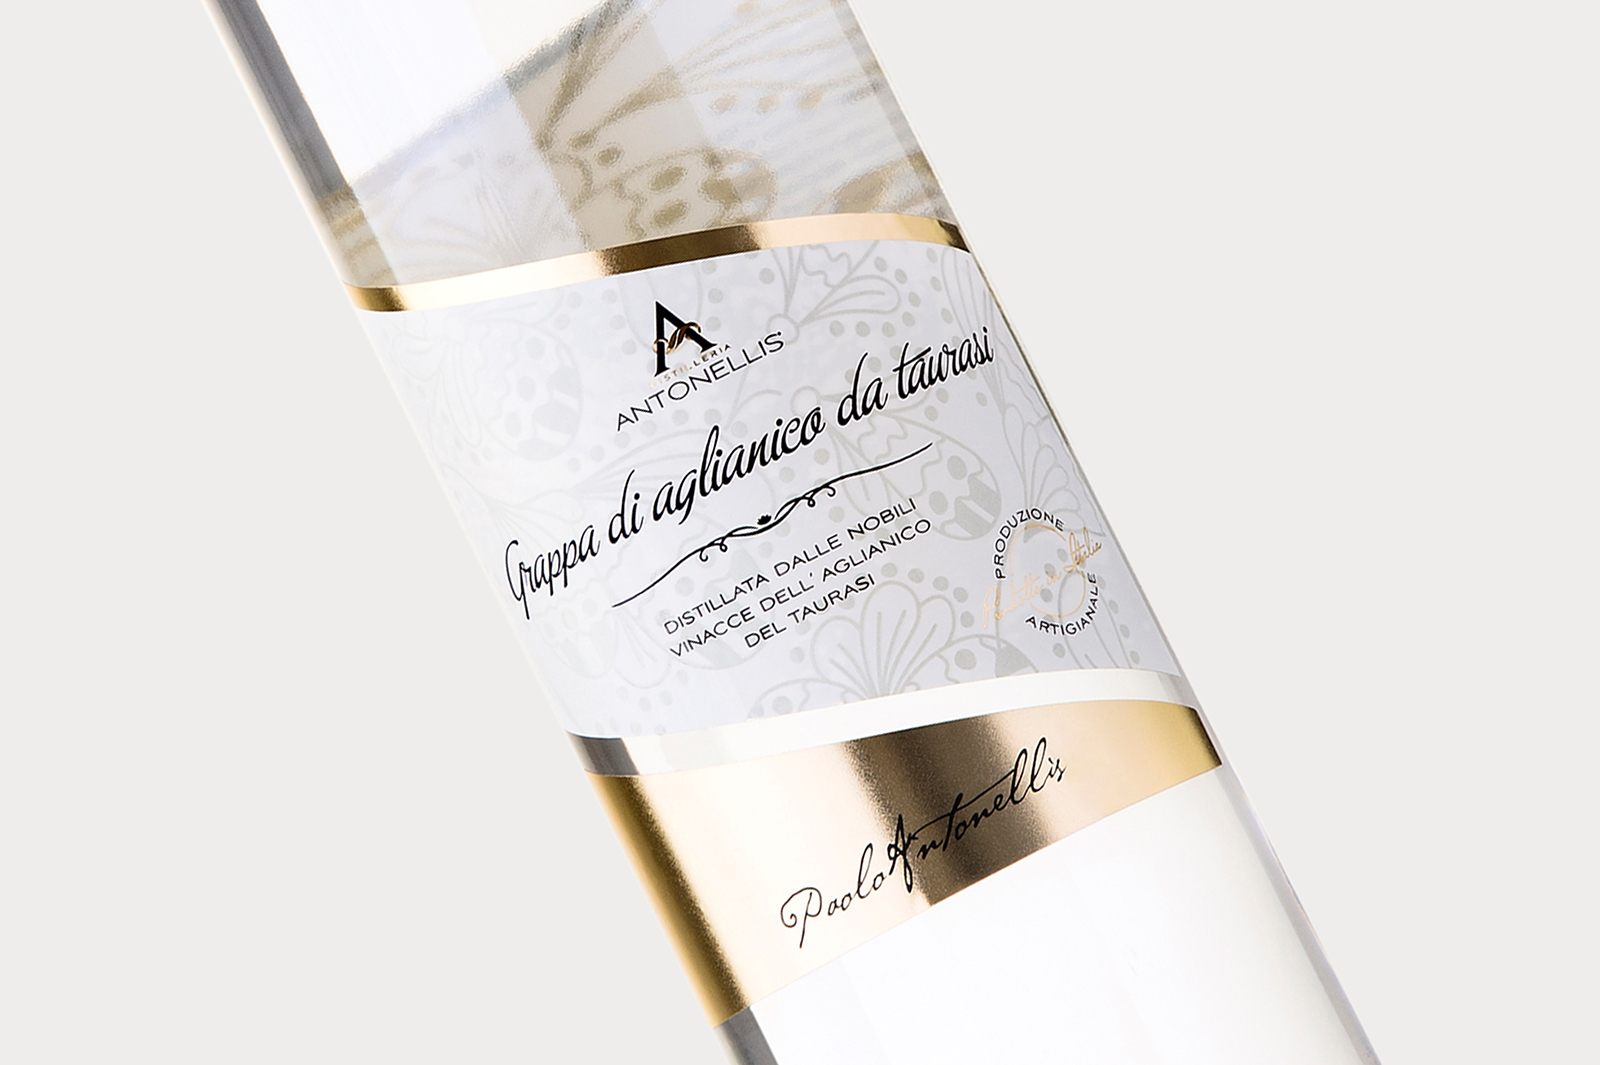 Packaging Design that Represents the Scents and Fragrances of the Grappa Before being Opened